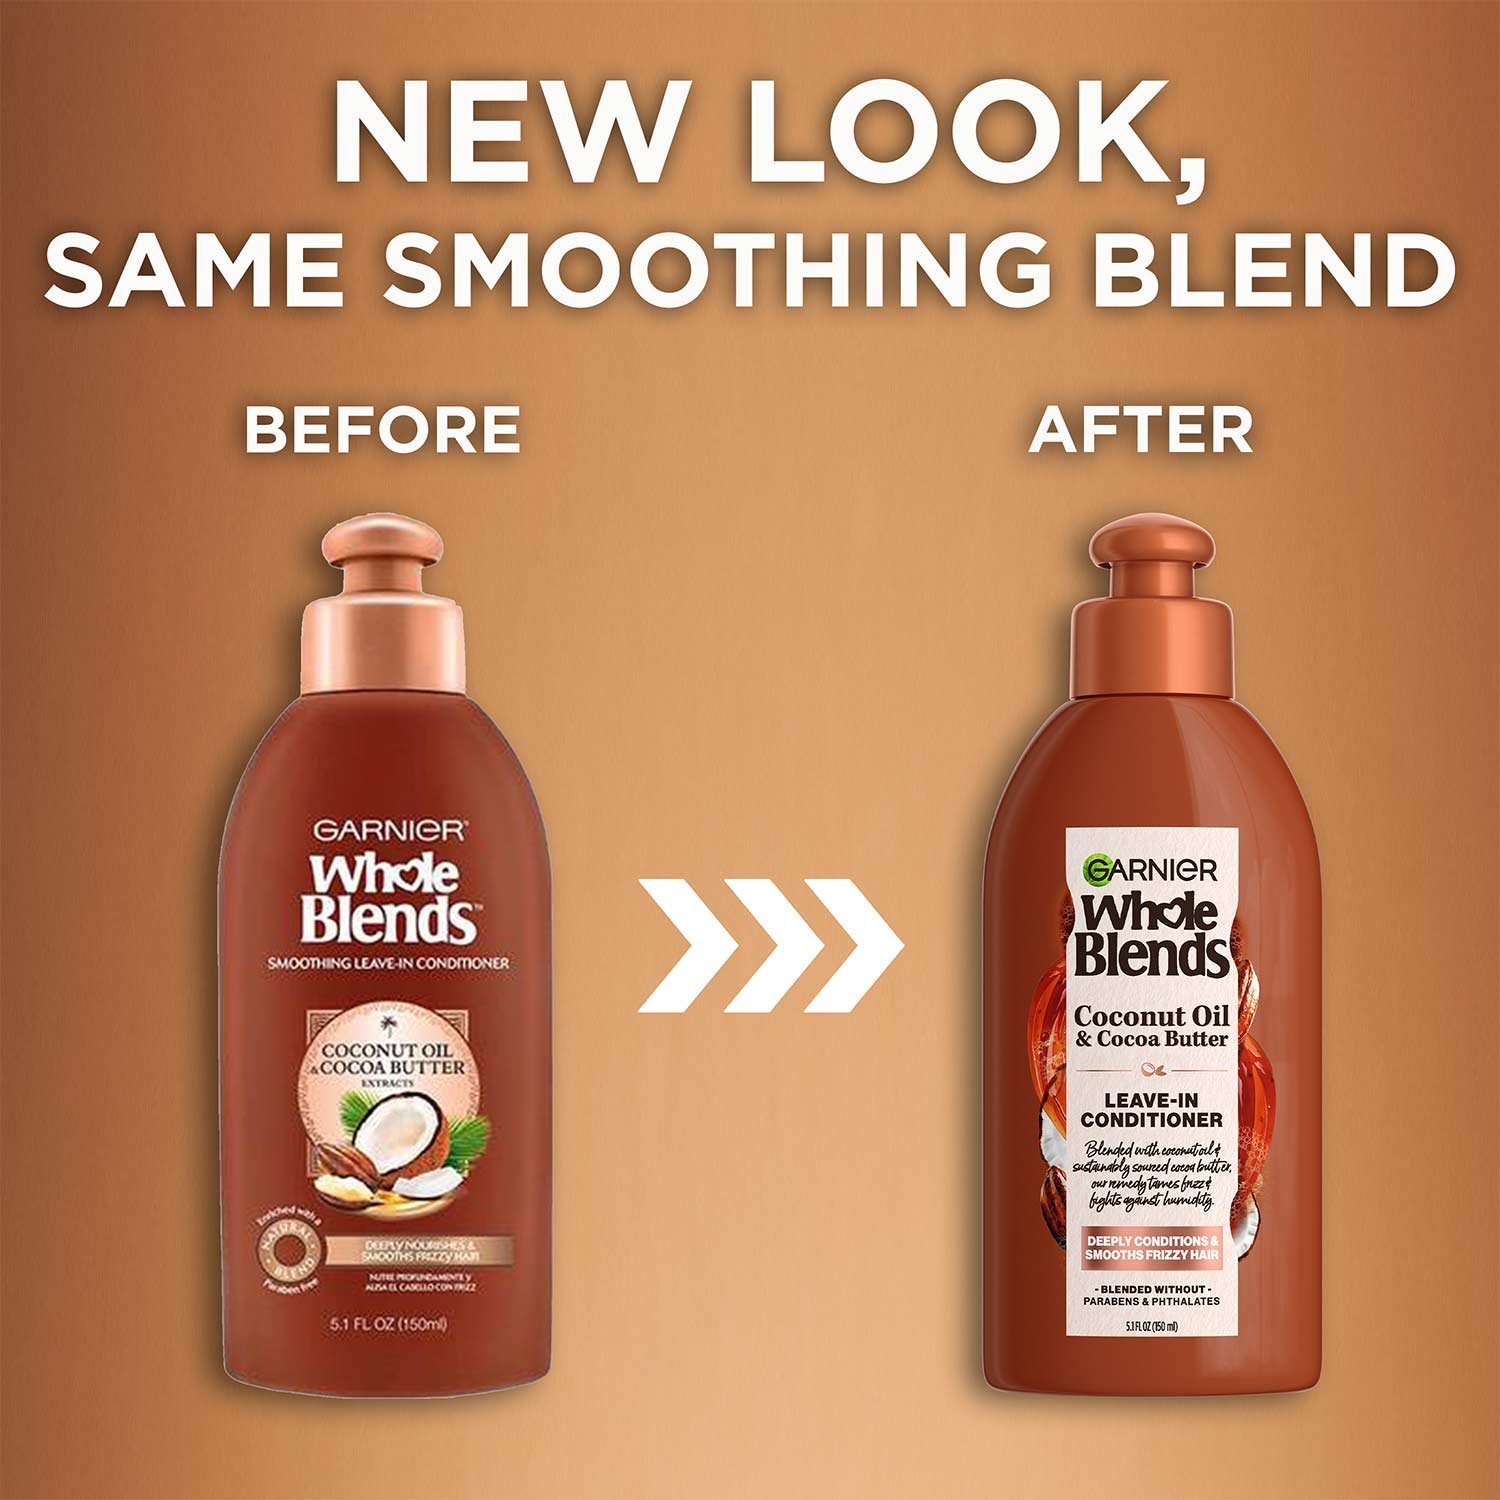 Whole Blends Coco Cocoa leave-in conditioner new look, same blend